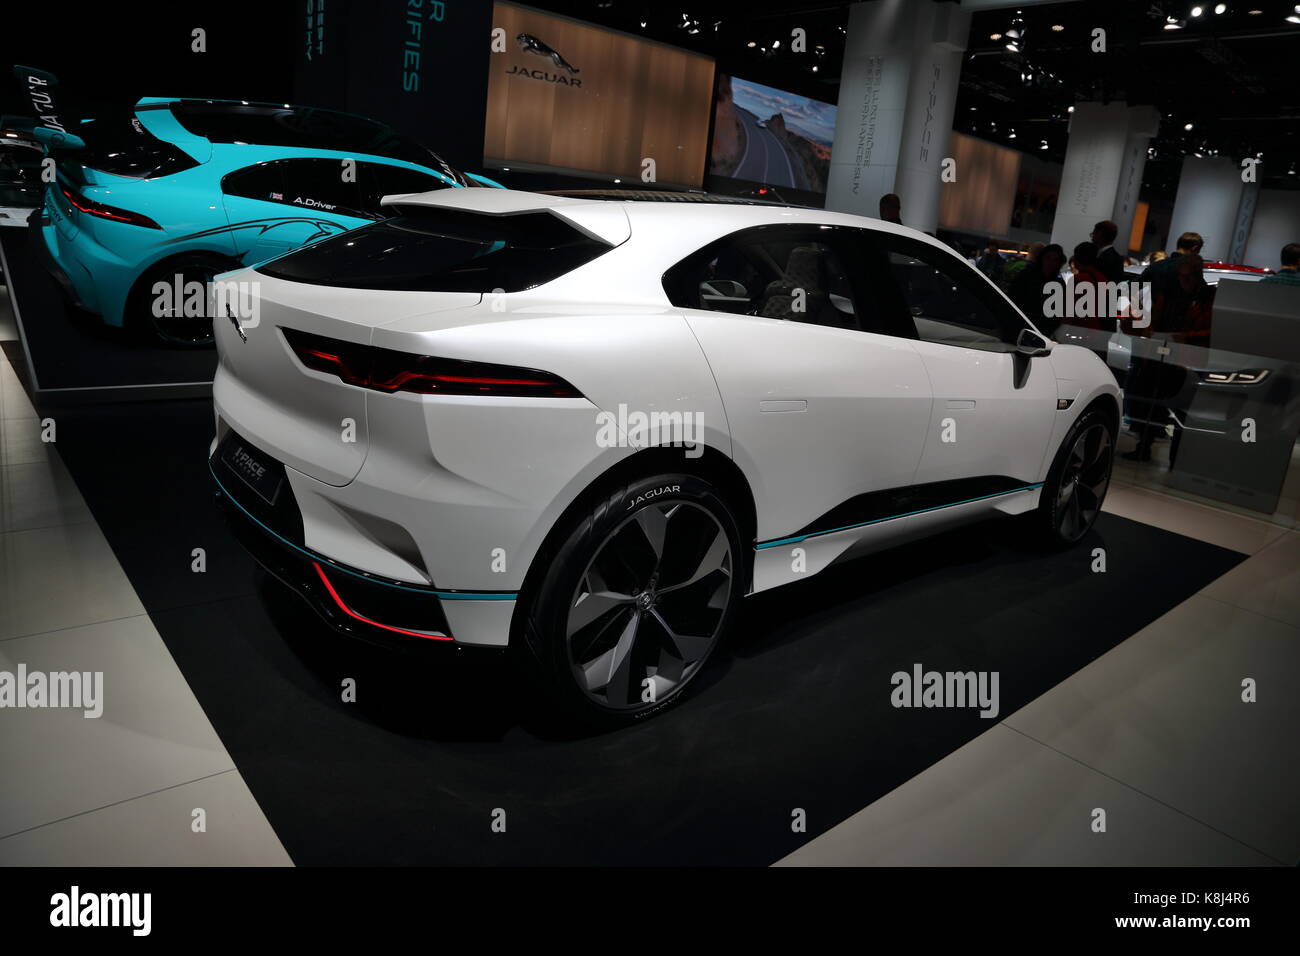 Car manufacturers from all over the world present their newest models and concept cars at this year's IAA car motor show in Frankfurt, Germany Stock Photo